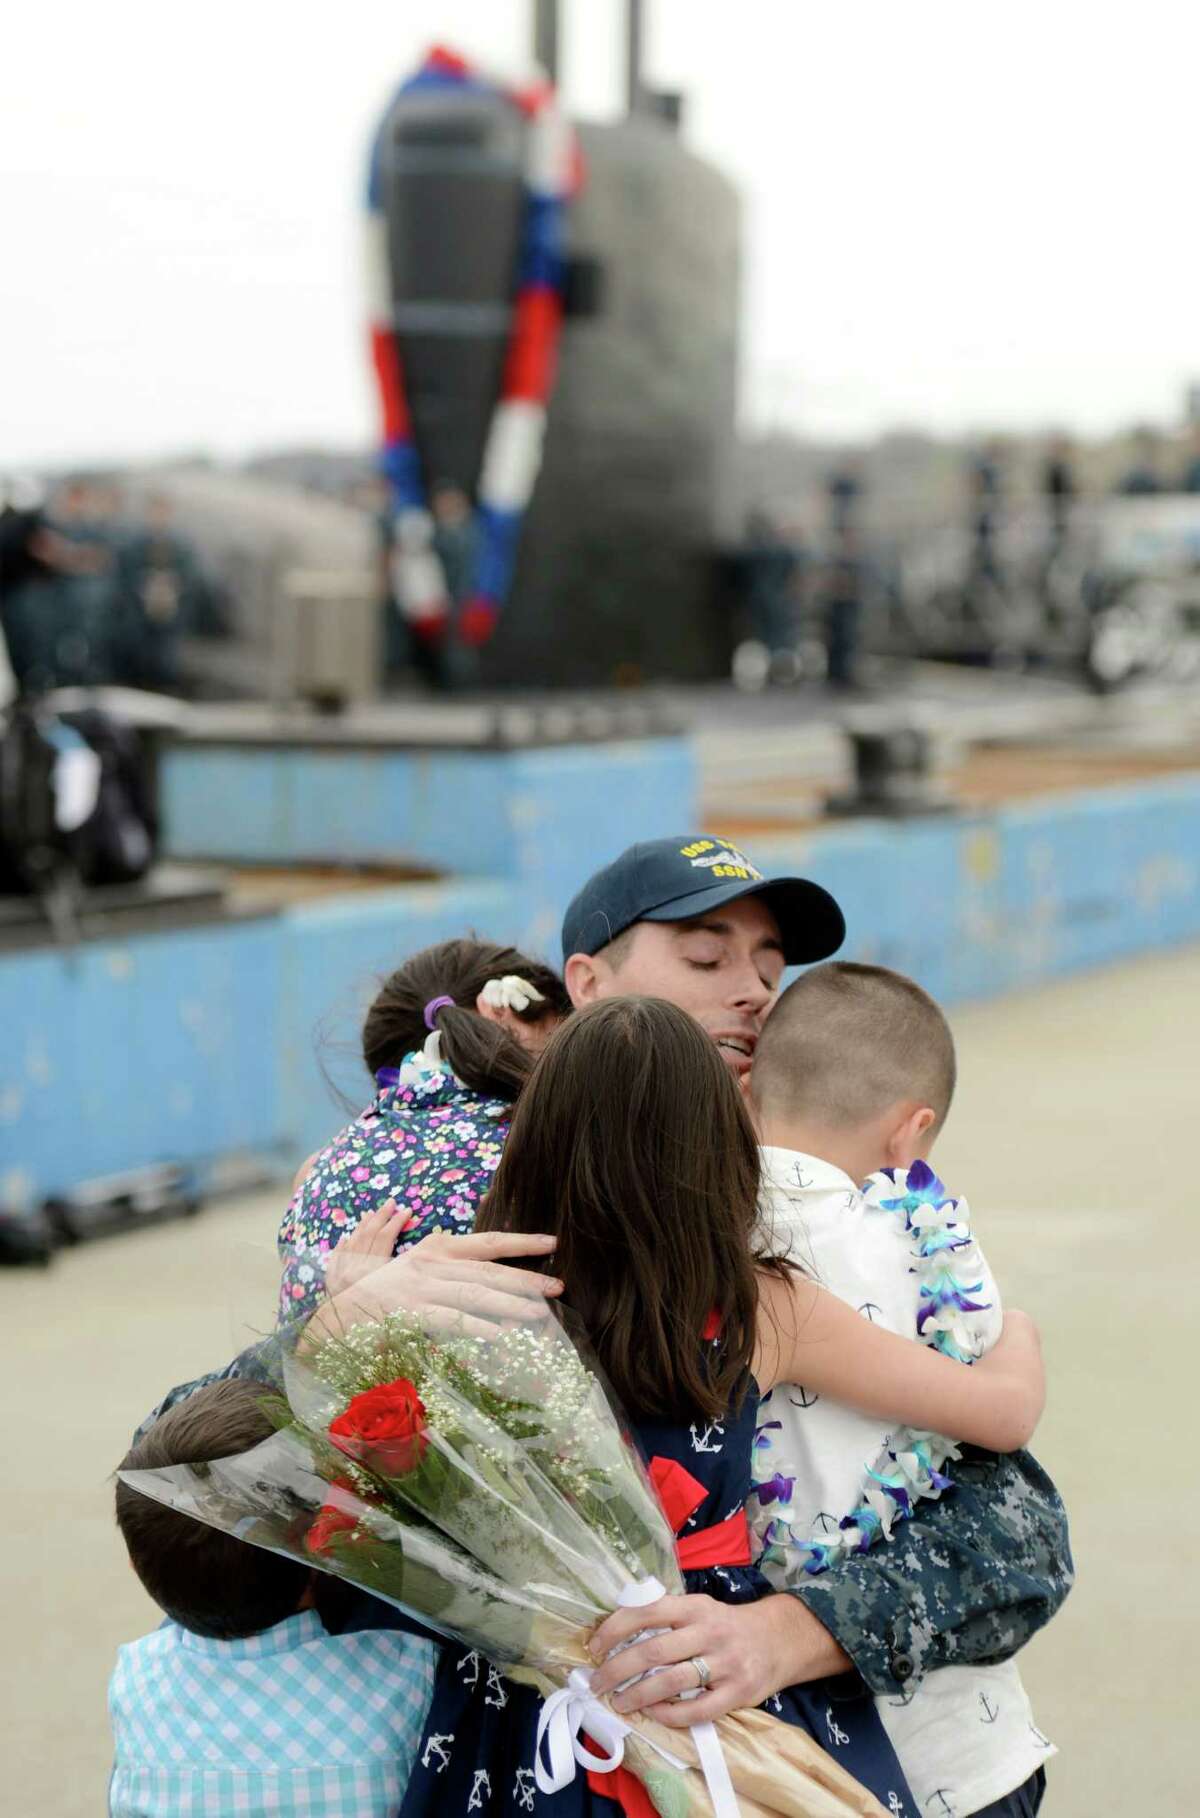 Petty Officer 2nd Class Clint Van de Water hugs his children Elizabeth, 10, Luke, 7, Isabelle, 7, and Jaxon 3, as the U.S. Navy submarine USS Toledo (SSN 769) returns to the Navy Submarine Base in Groton, Conn., Monday, April 25, 2016, following a six-month deployment. The Toledo visited ports in Bahrain, France, Spain and Greece.